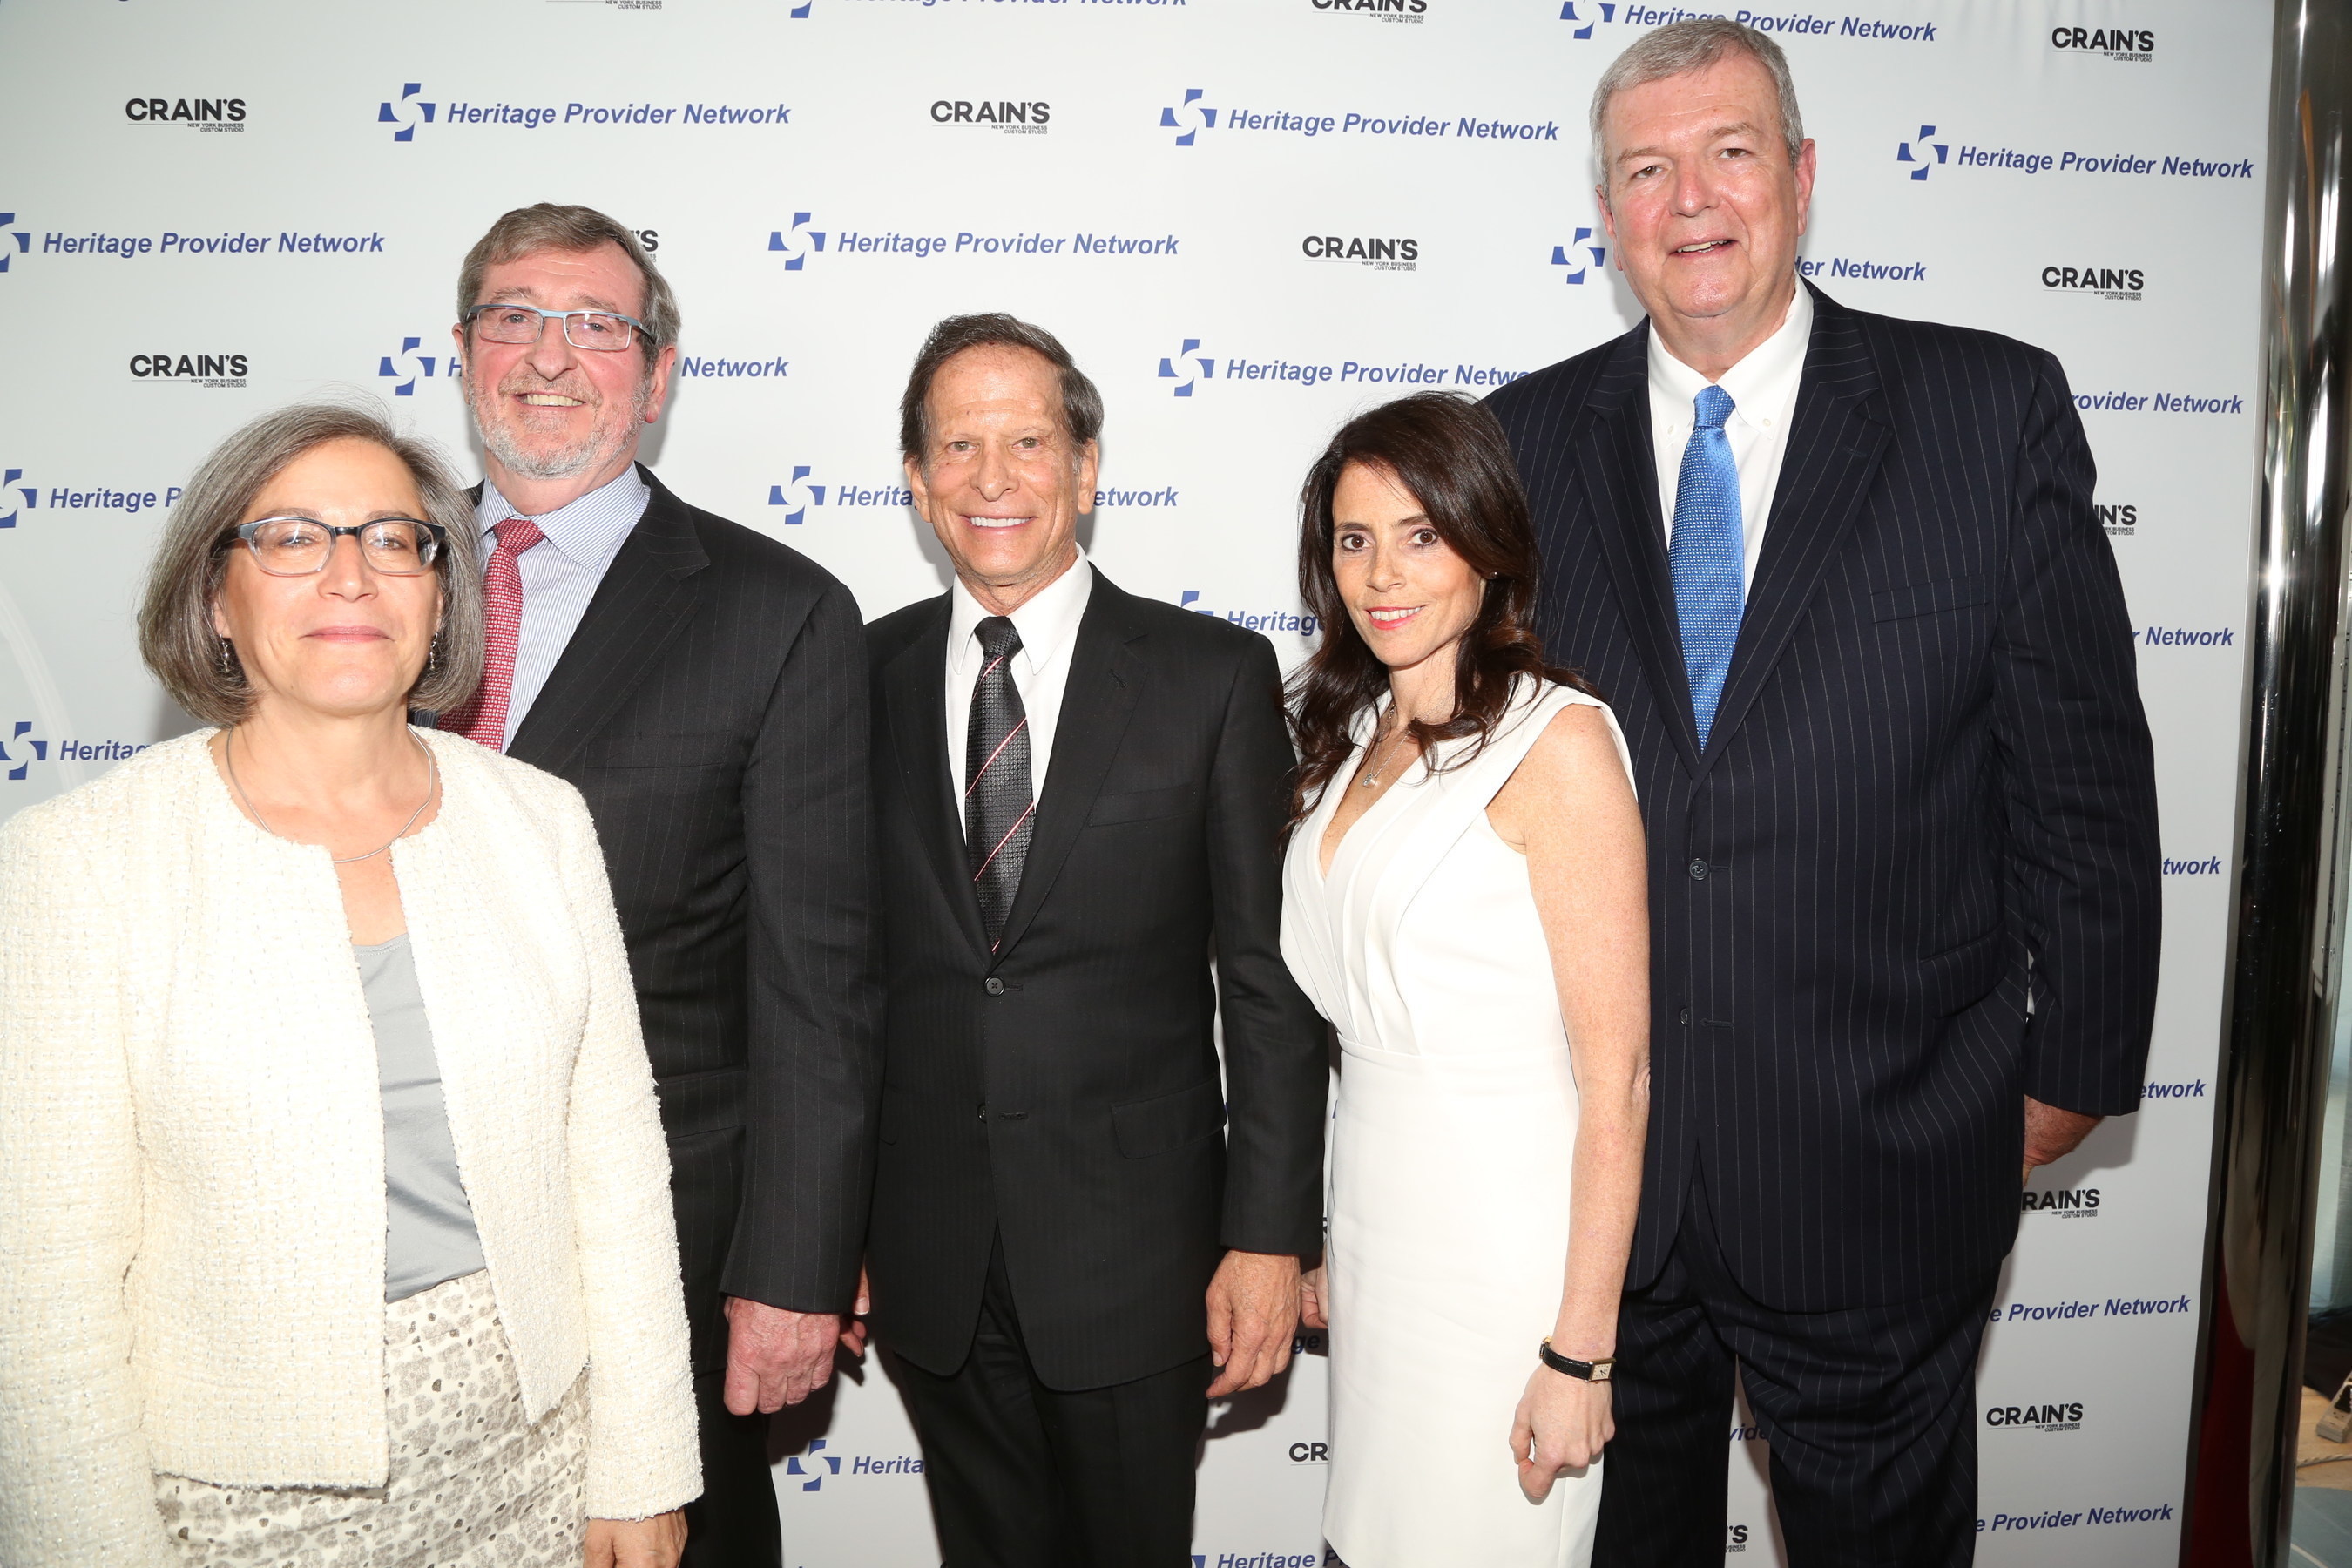 From left to right: Louise Cohen, CEO Primary Care Development Corp, Michael Dowling, Pres&CEO, Northwell Health, Dr Richard Merkin, Pres&CEO Heritage Provider Network, Jill Kaplan, VP & Publisher of Crain's NY Business and Mark Wagar, President of Heritage Medical Systems. Photo credit: http://douggoodman.com/CNYB